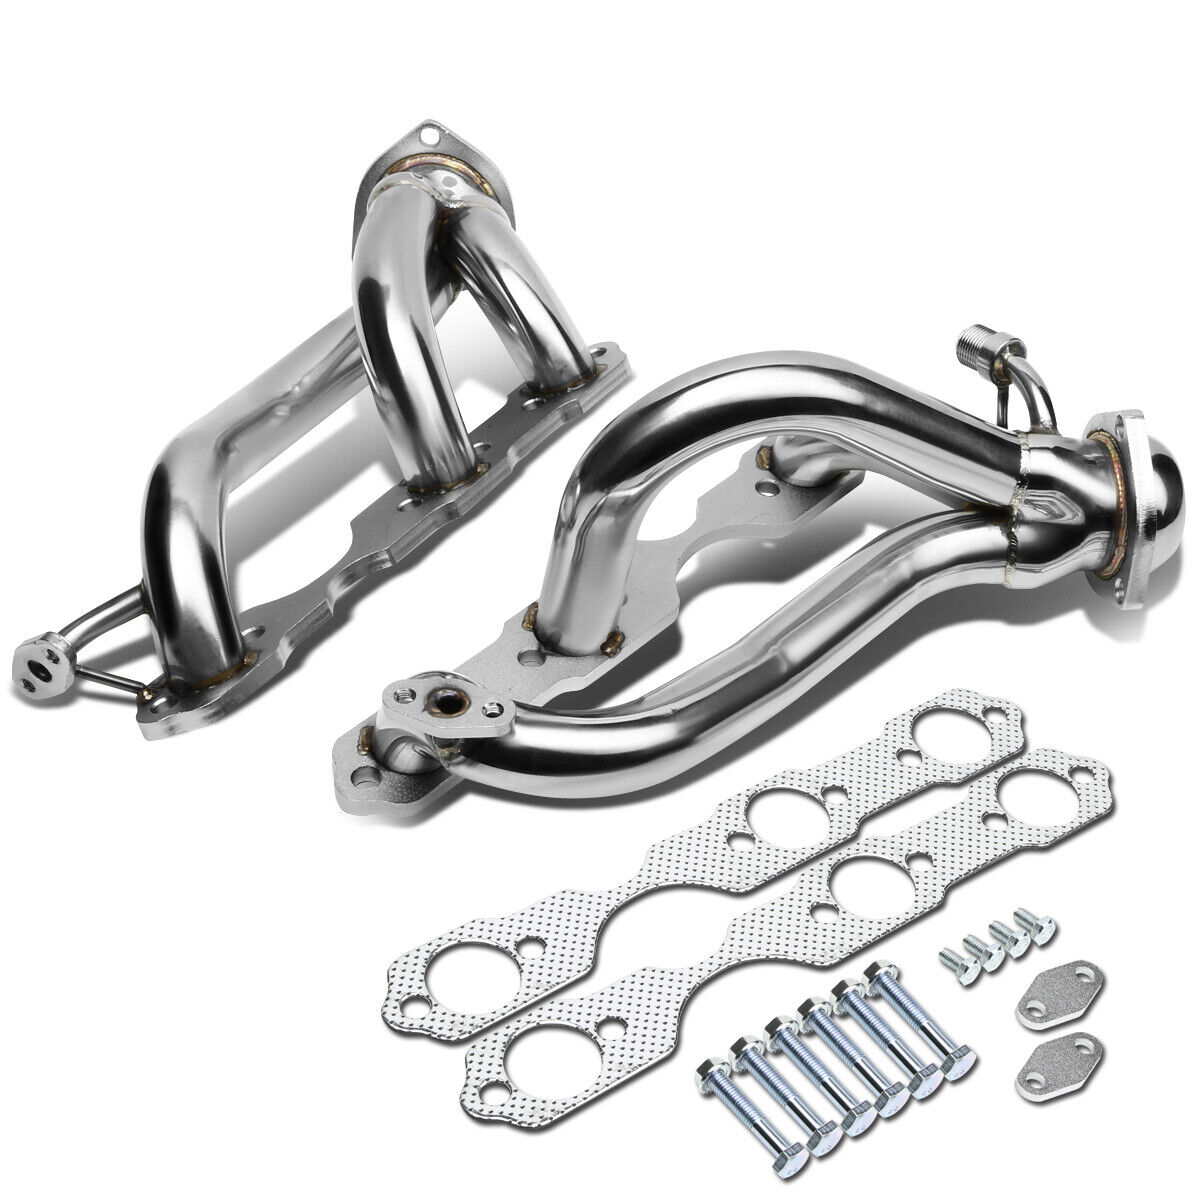 CHEVY/GMC SUV/TRUCK S10 4.3L V6 4WD/AIR INJECTION STAINLESS STEEL EXHAUST HEADER